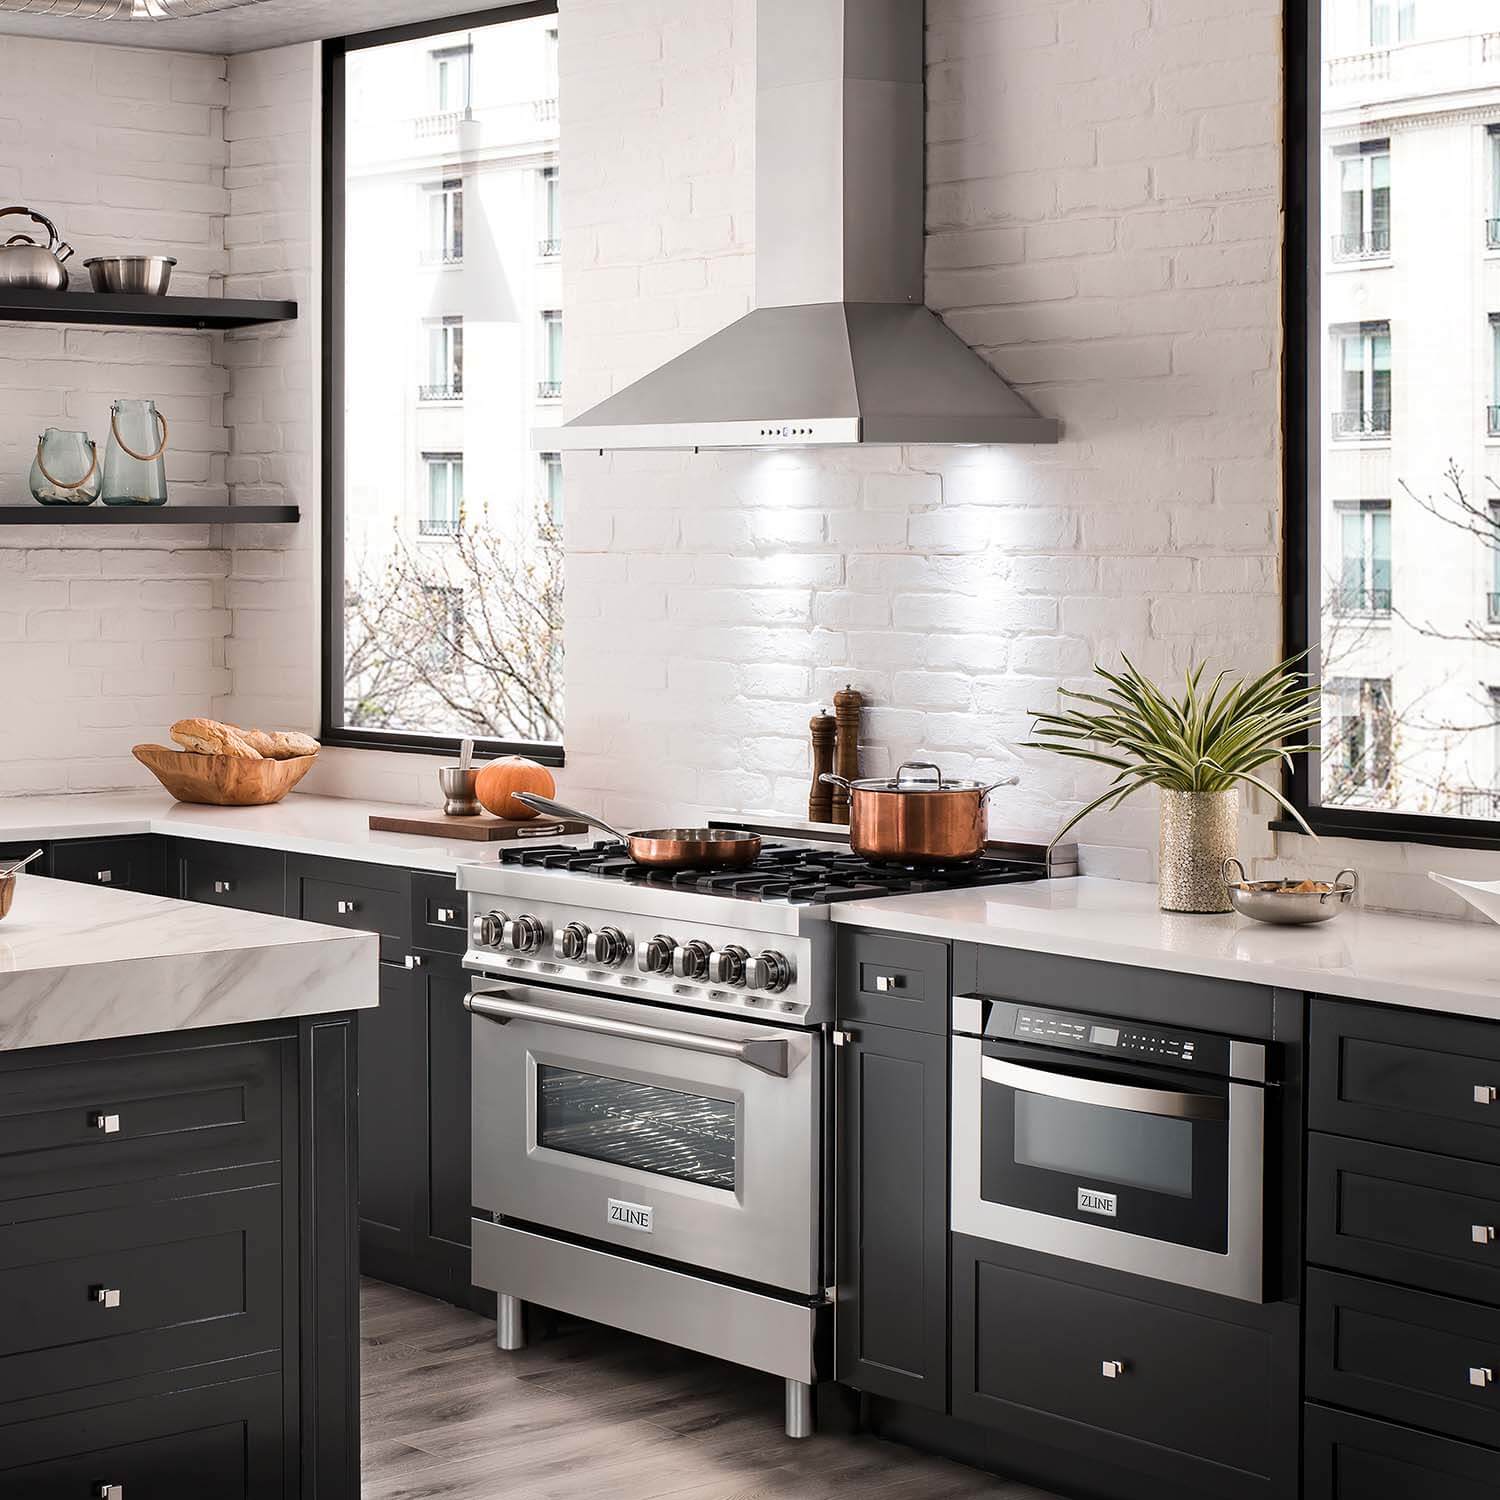 ZLINE appliance package with 36" range, 36" range hood, and microwave drawer in an apartment kitchen.